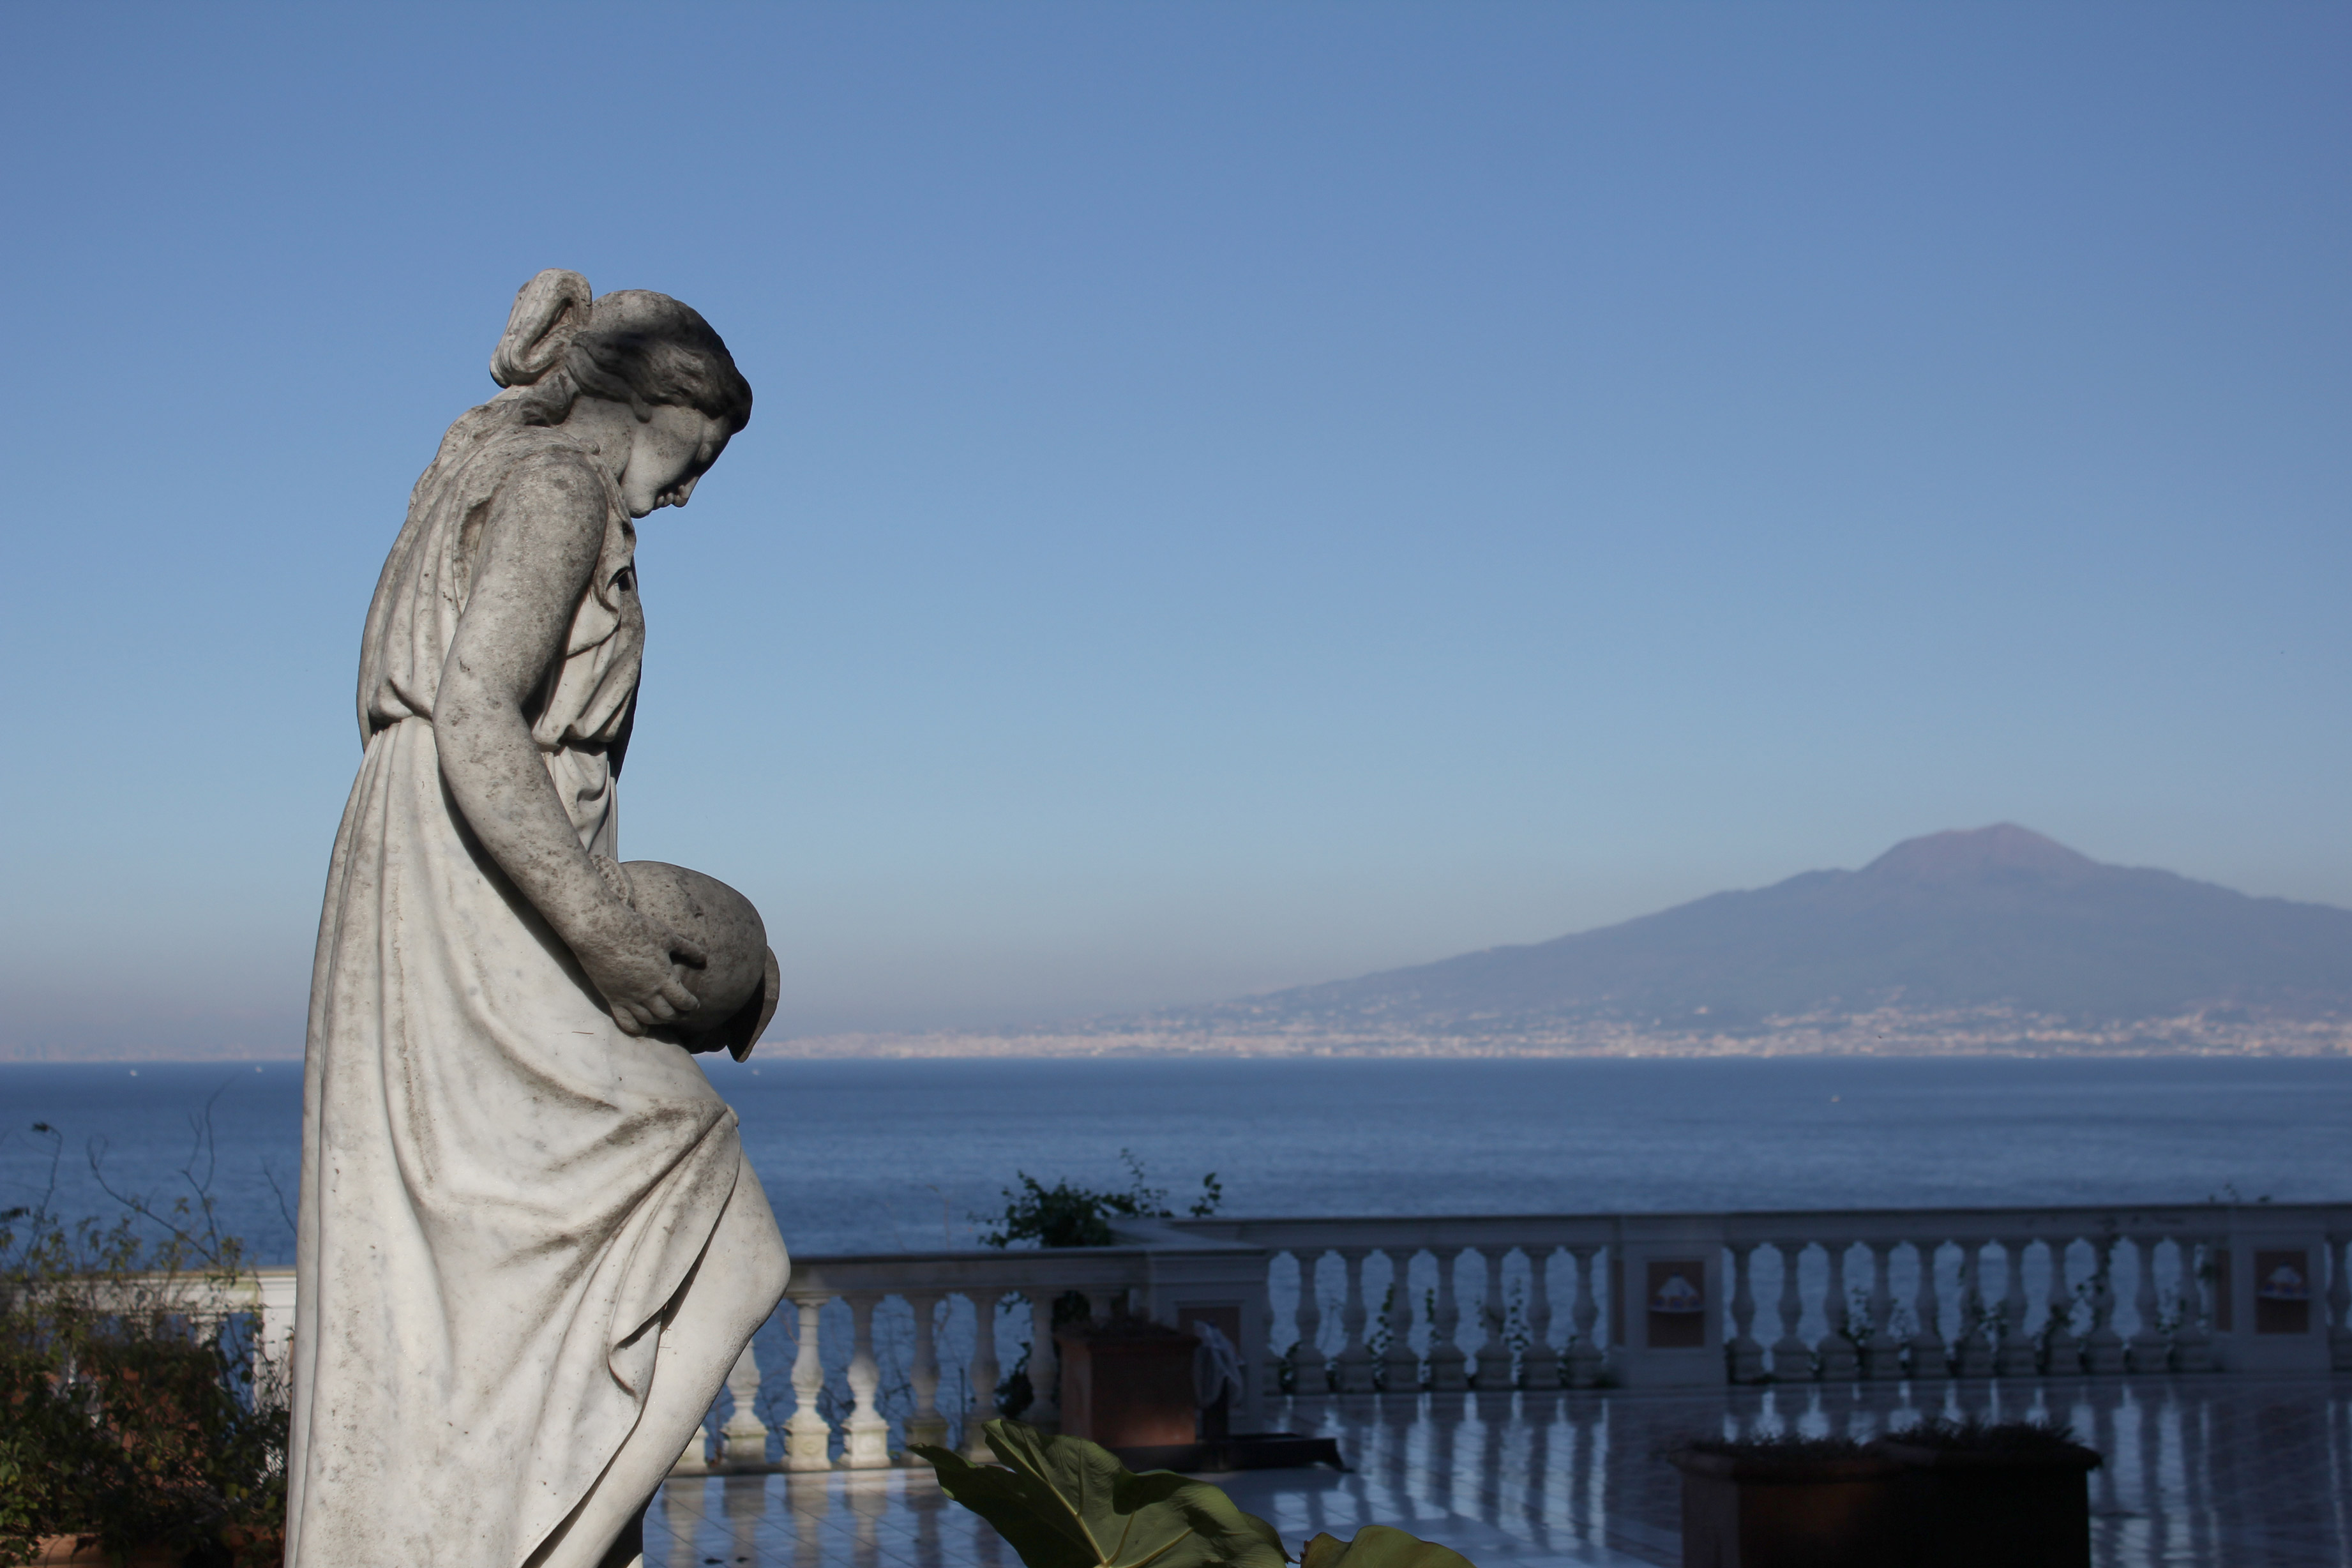 Hotel Parco dei Principi, Sorrento. A perfect balance between architecture and nature, the “chef d’oeuvre” of Gio Ponti overlooks the sea from the cliffs